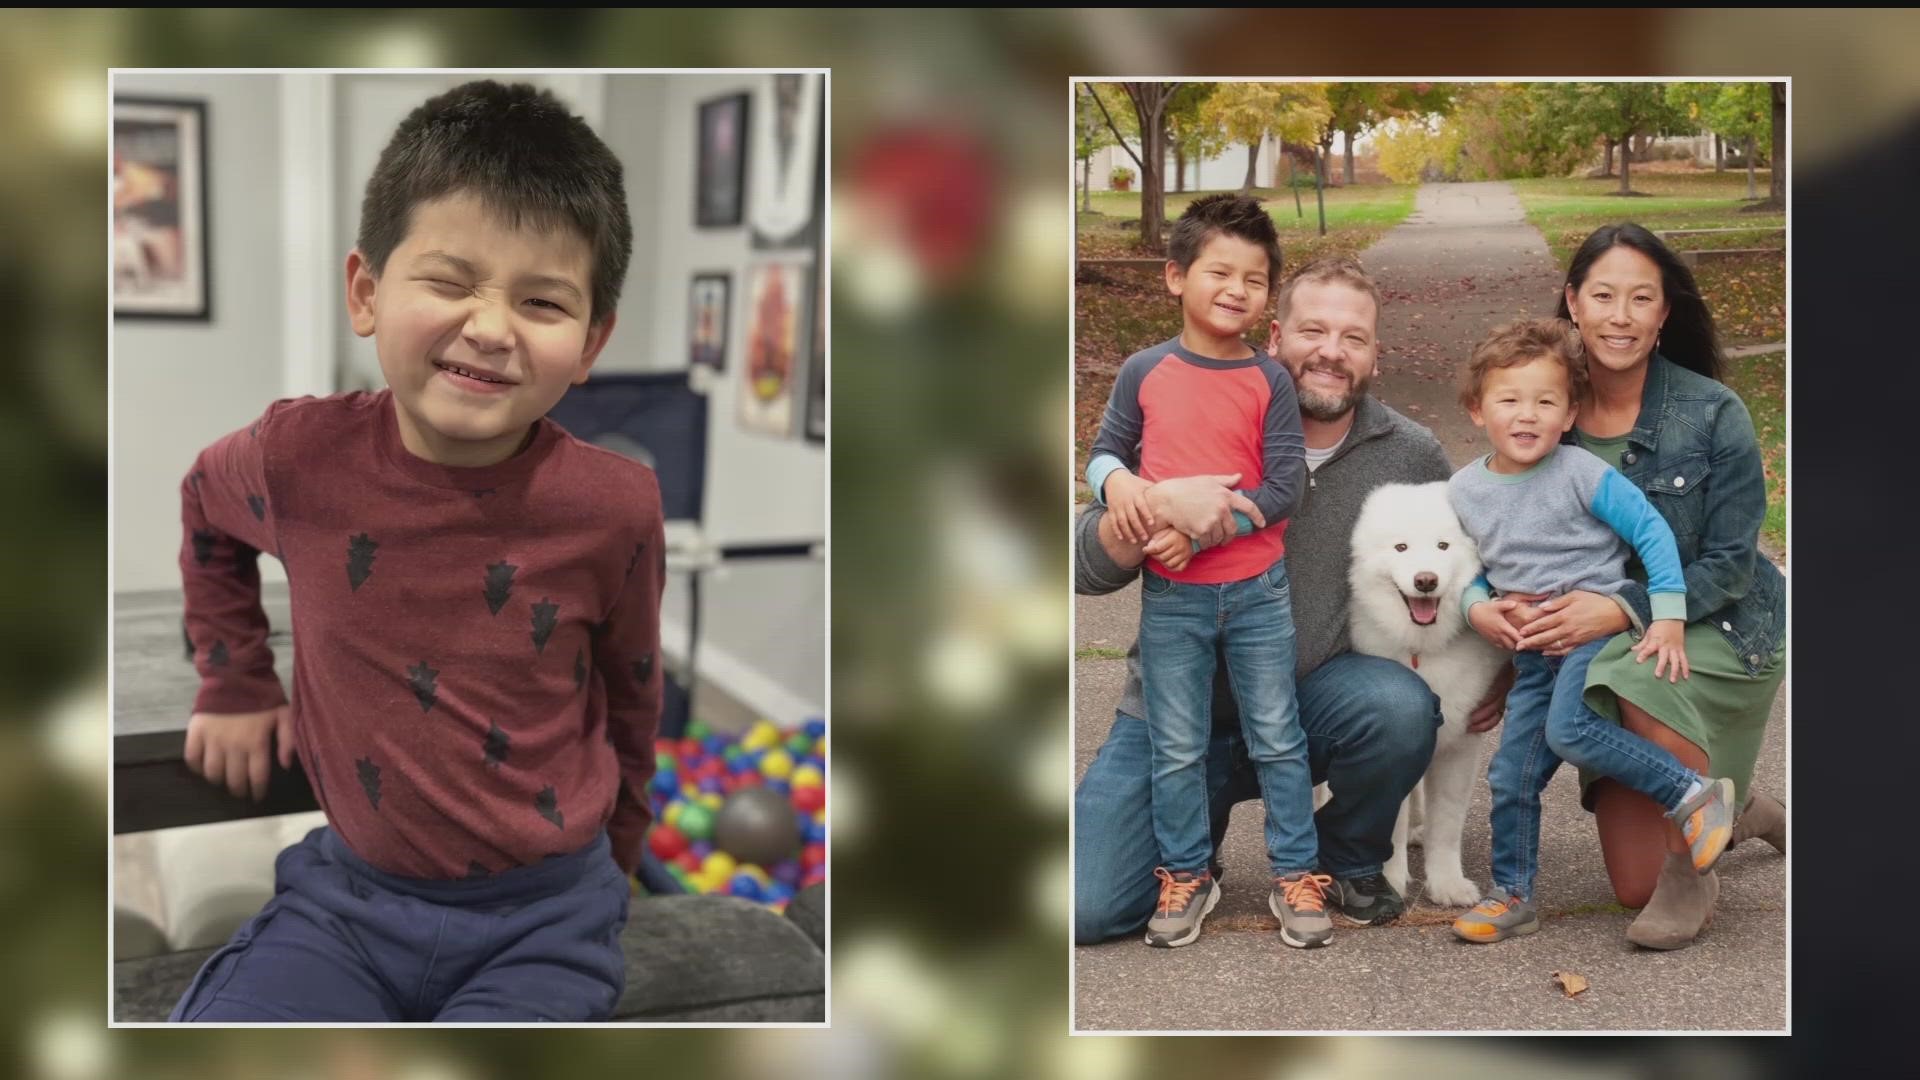 When a local mom found out her son had a rare disease that would change his life, she decided she would try to find a cure.